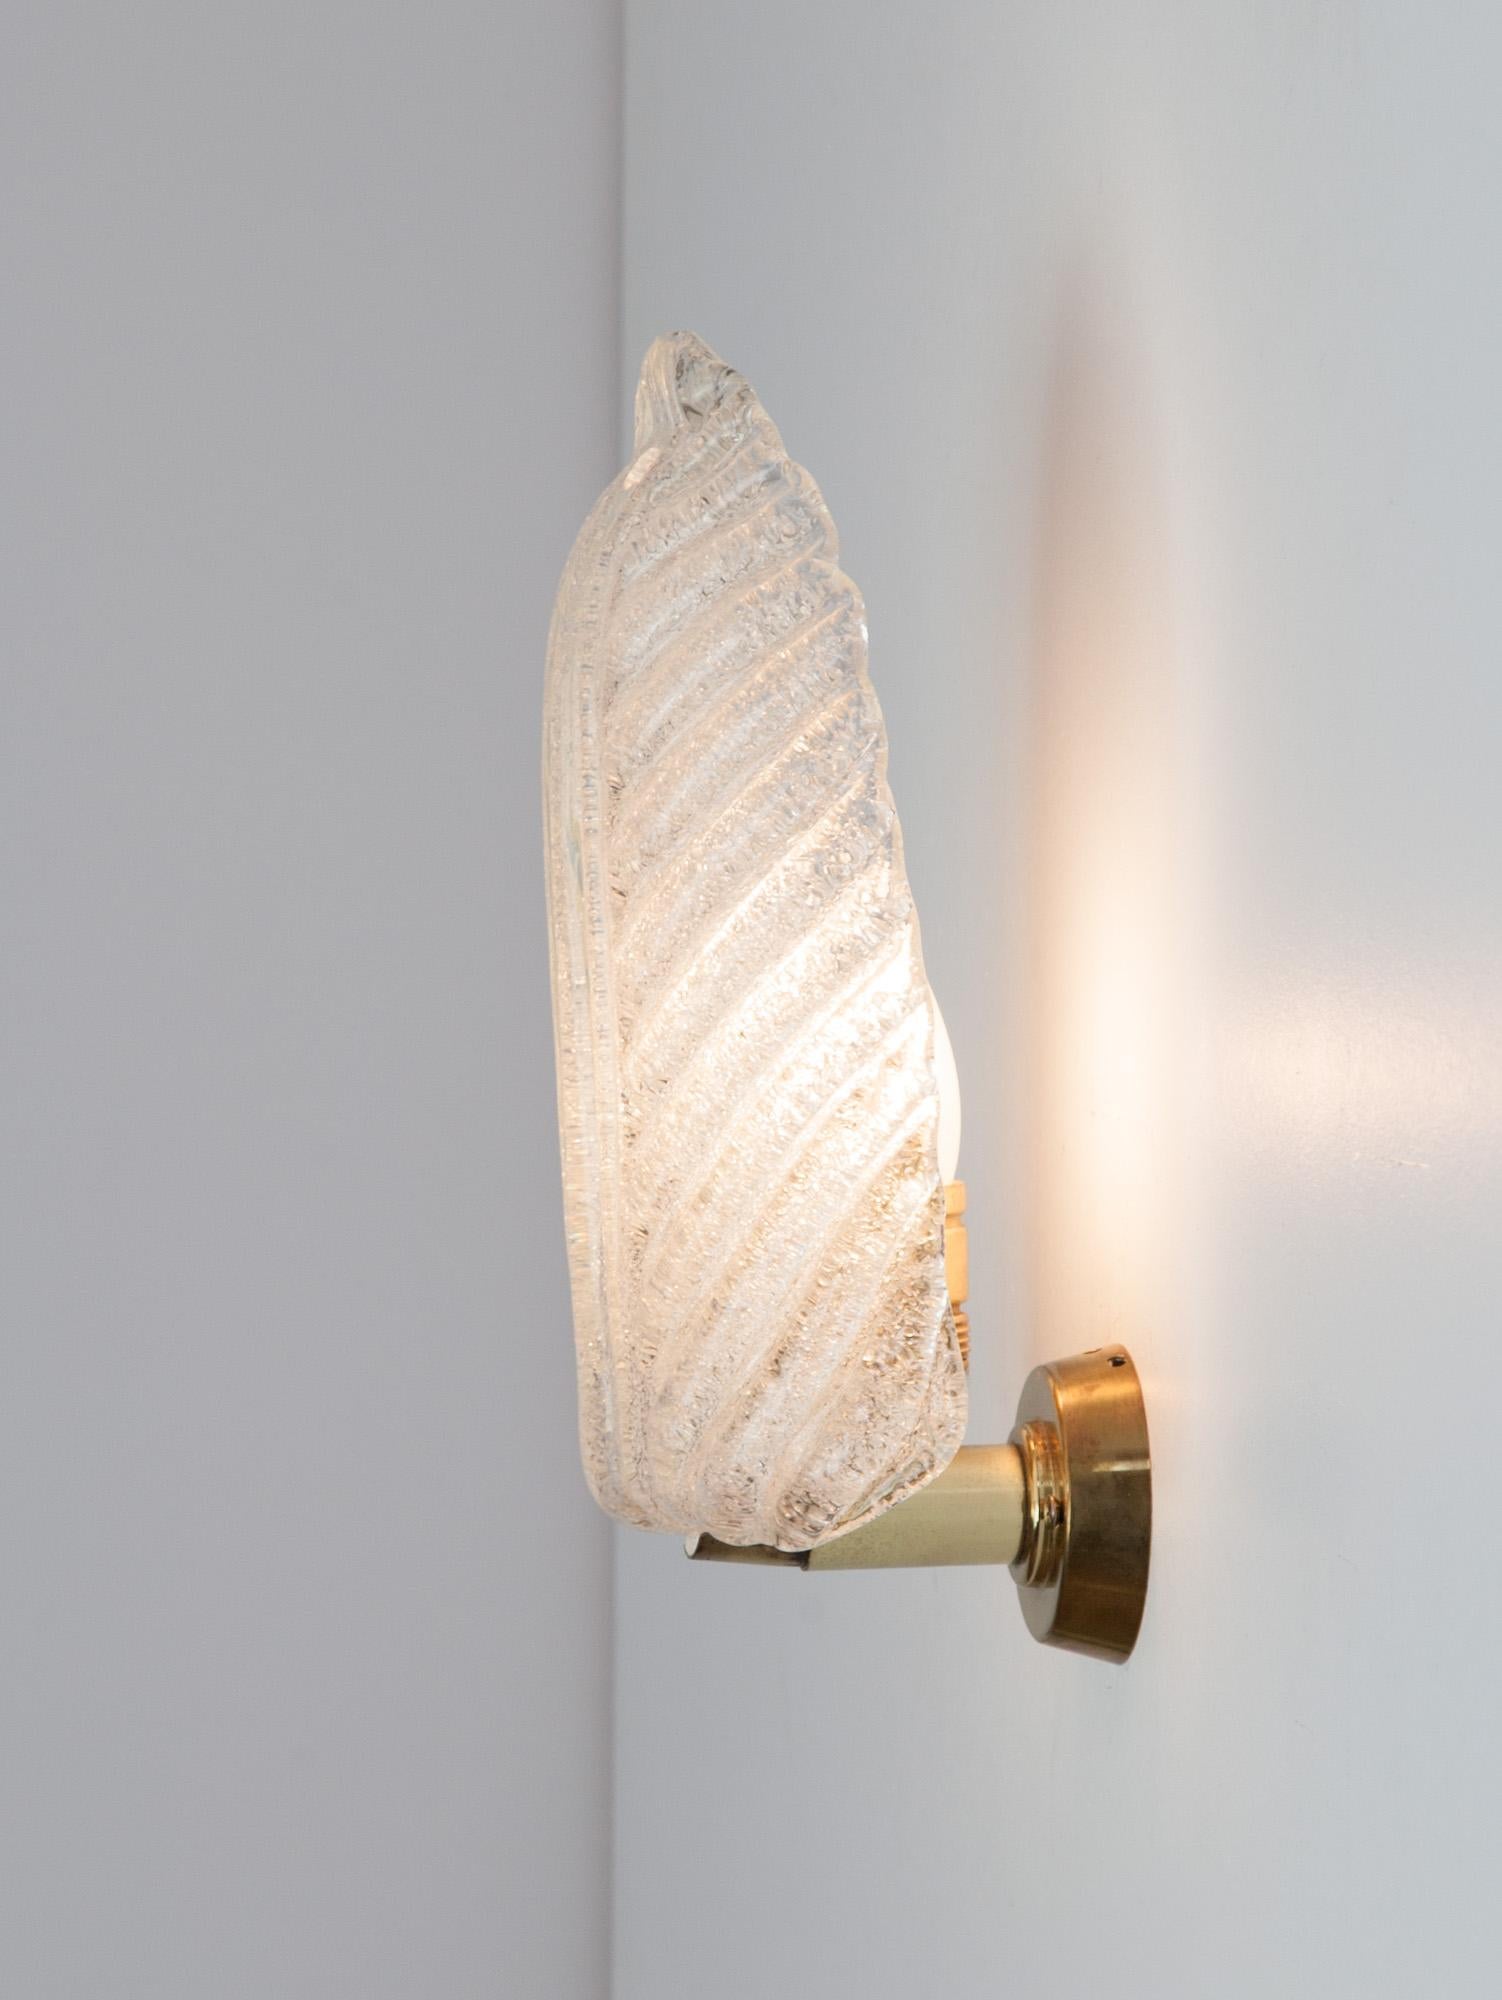 20th Century Vintage Italian Murano Glass Leaf Wall Light, Sconce, 1980s For Sale